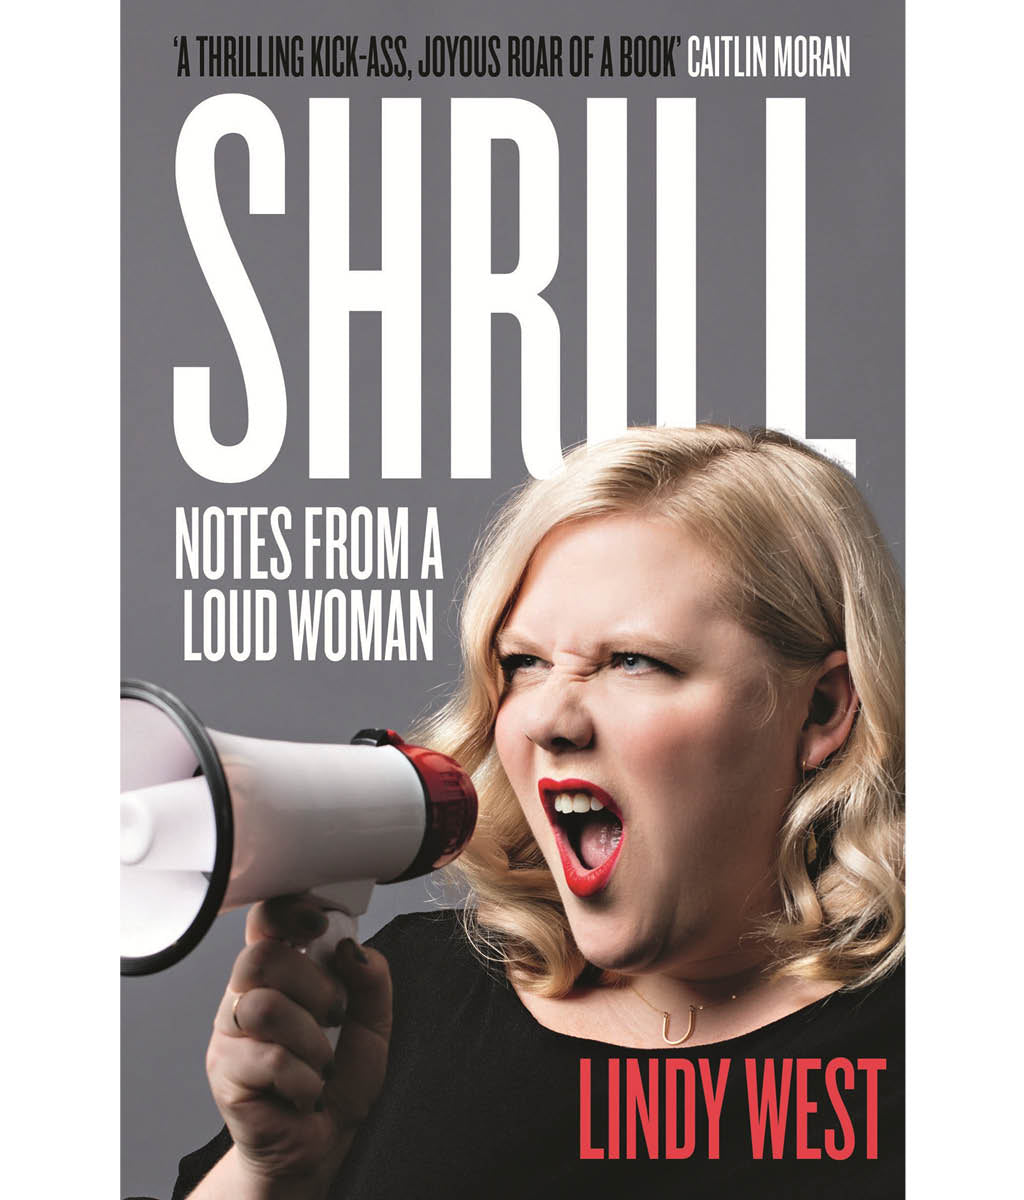 Shrill: Notes from a Loud Woman by Lindy West